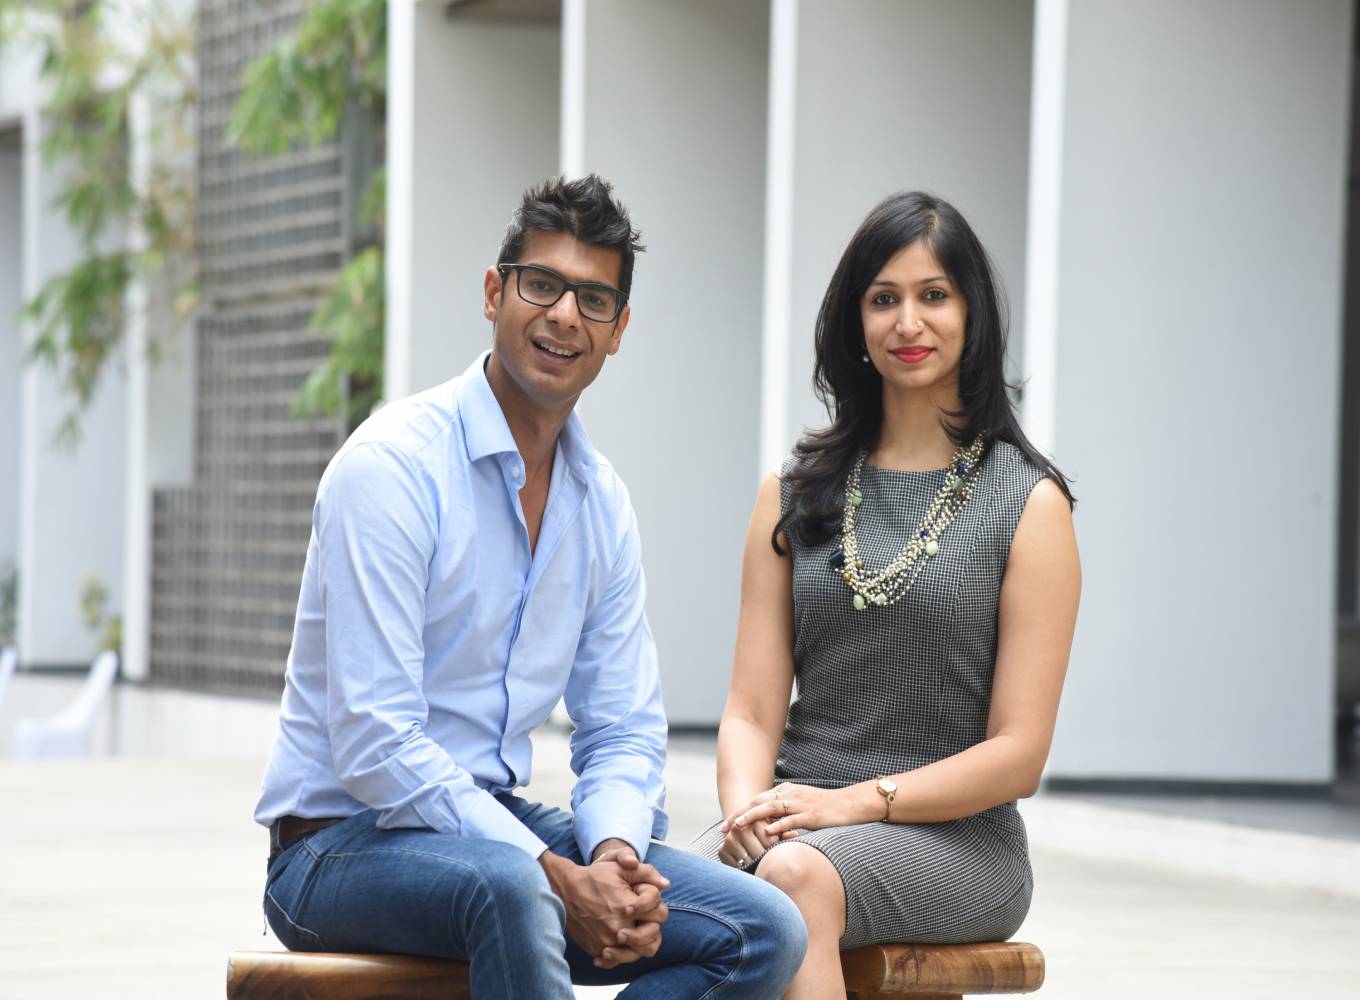 Couplepreneurs On Love, Work, Dating Policies And #MeToo Movement On Valentines Day